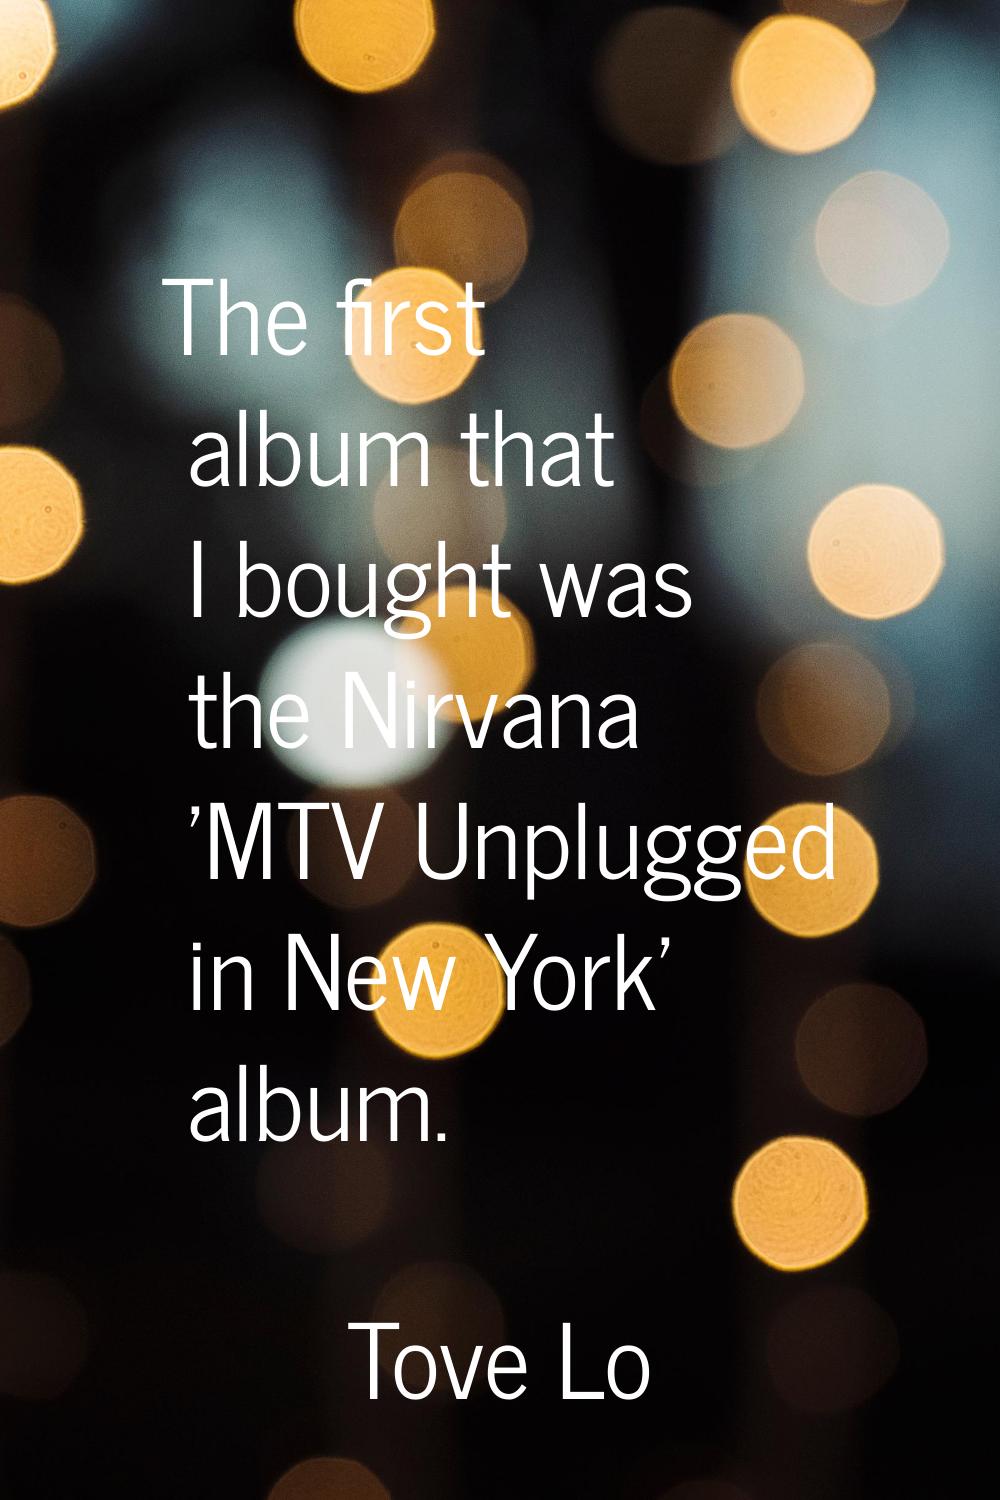 The first album that I bought was the Nirvana 'MTV Unplugged in New York' album.